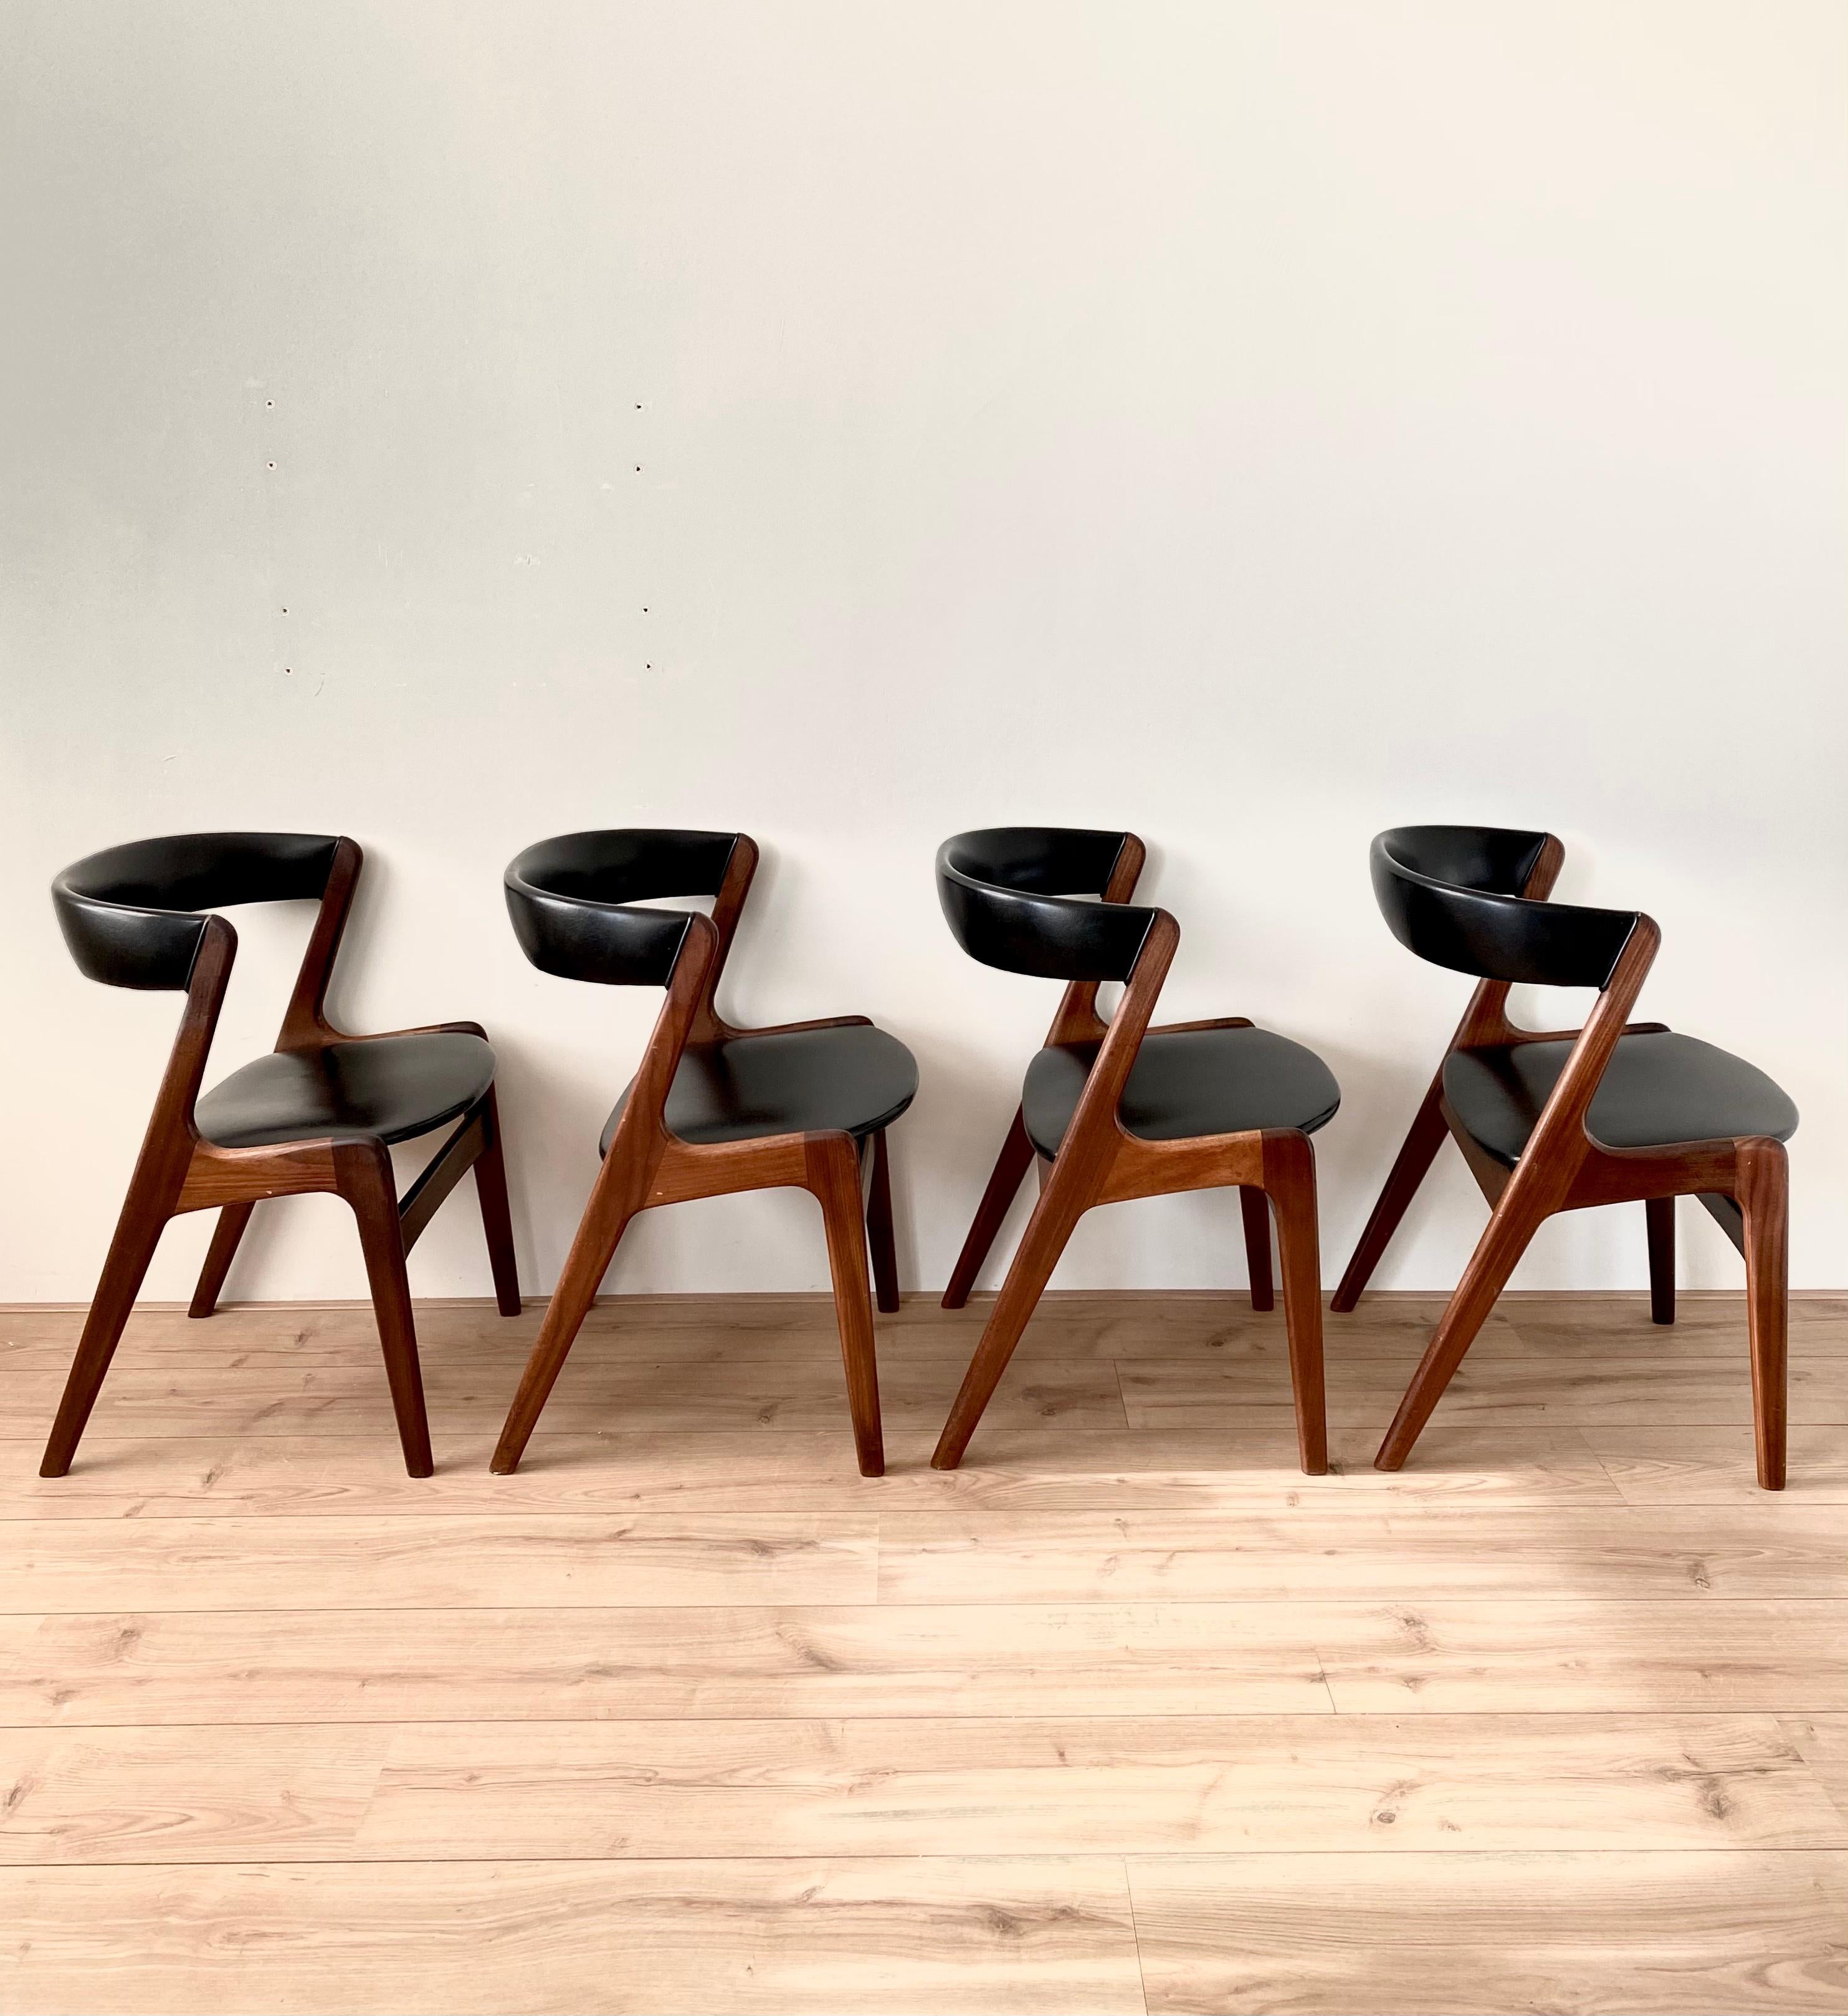 Mid-Century Modern Midcentury Danish Design Dining Chairs By T.H. Harlev for Farstrup Mobler. For Sale